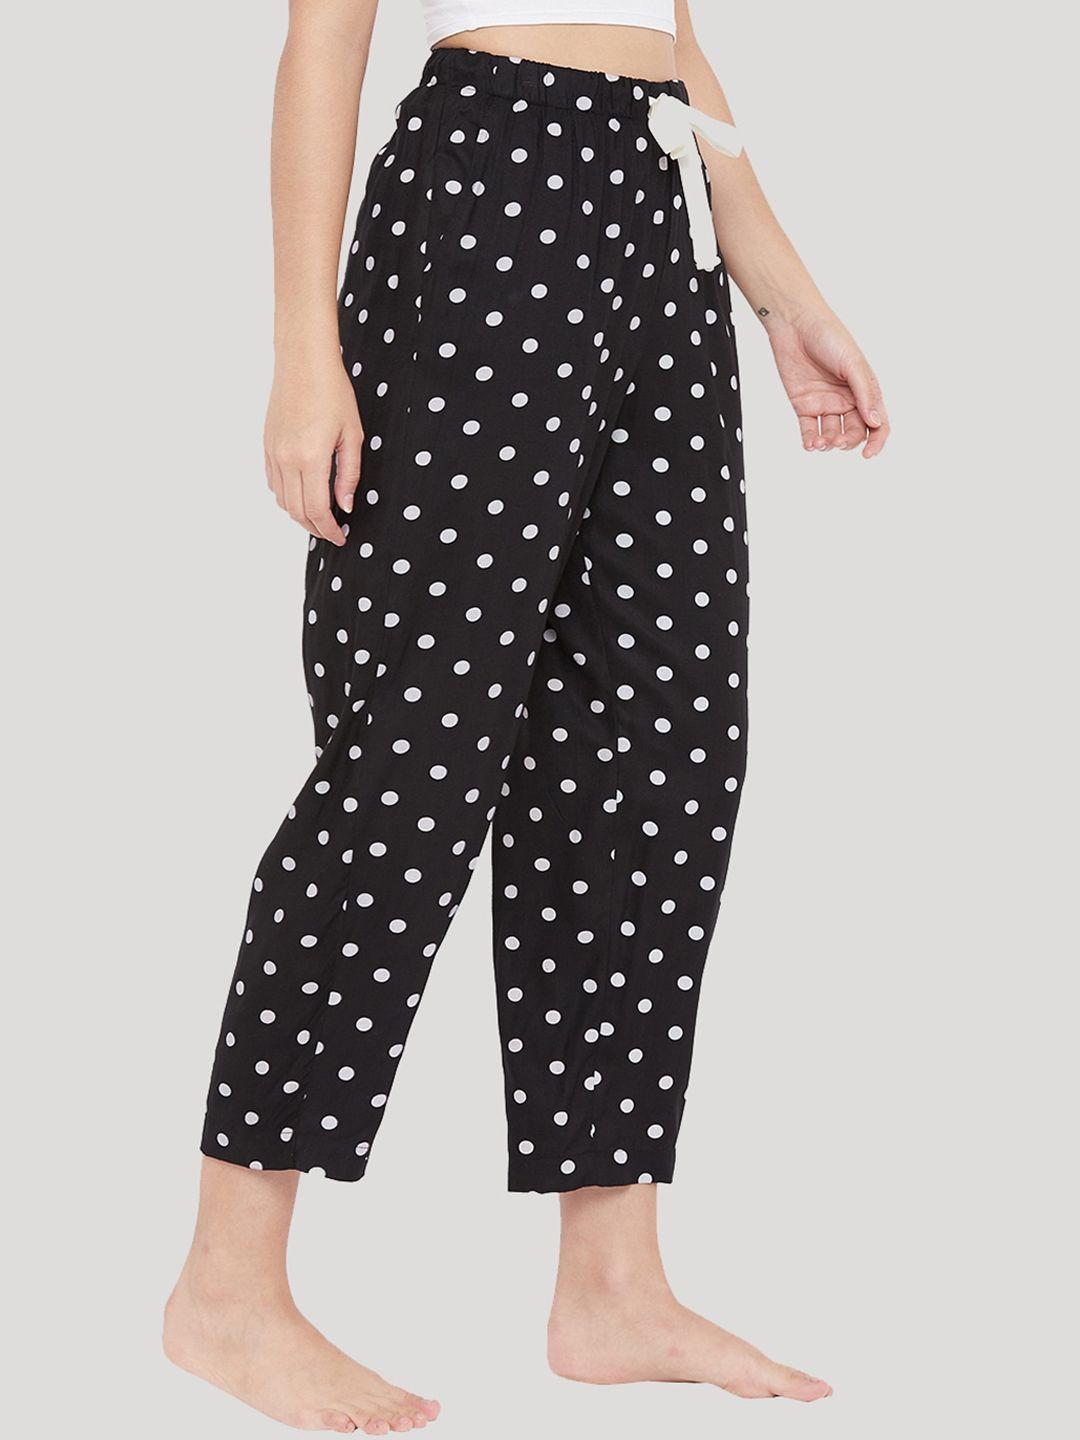 style shoes women black and white printed cotton lounge pants